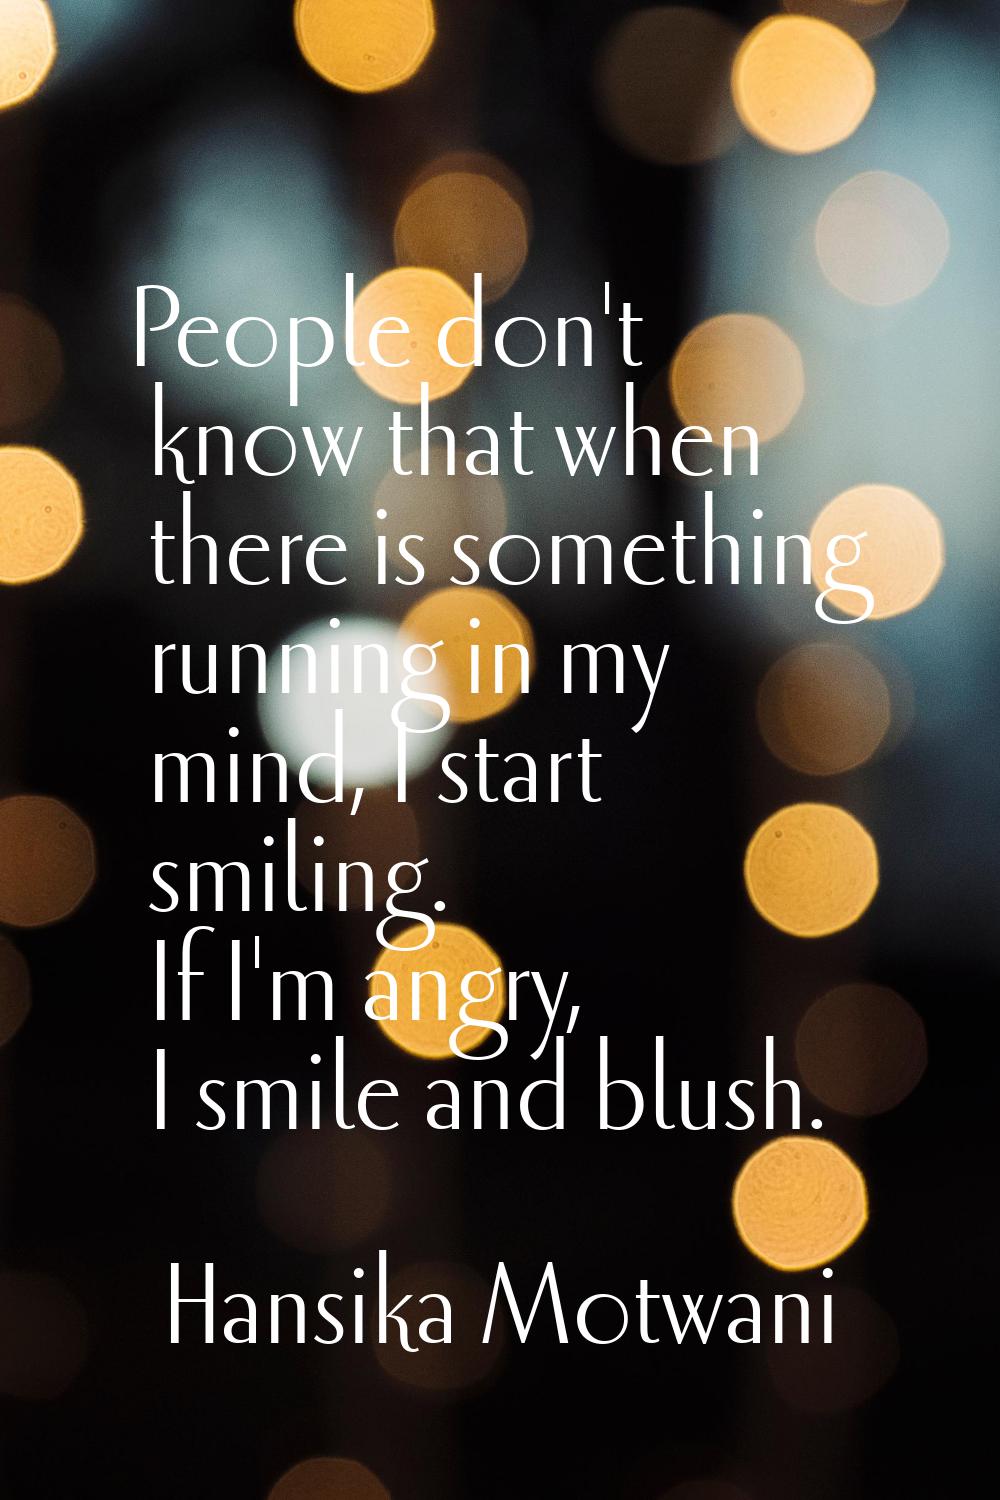 People don't know that when there is something running in my mind, I start smiling. If I'm angry, I